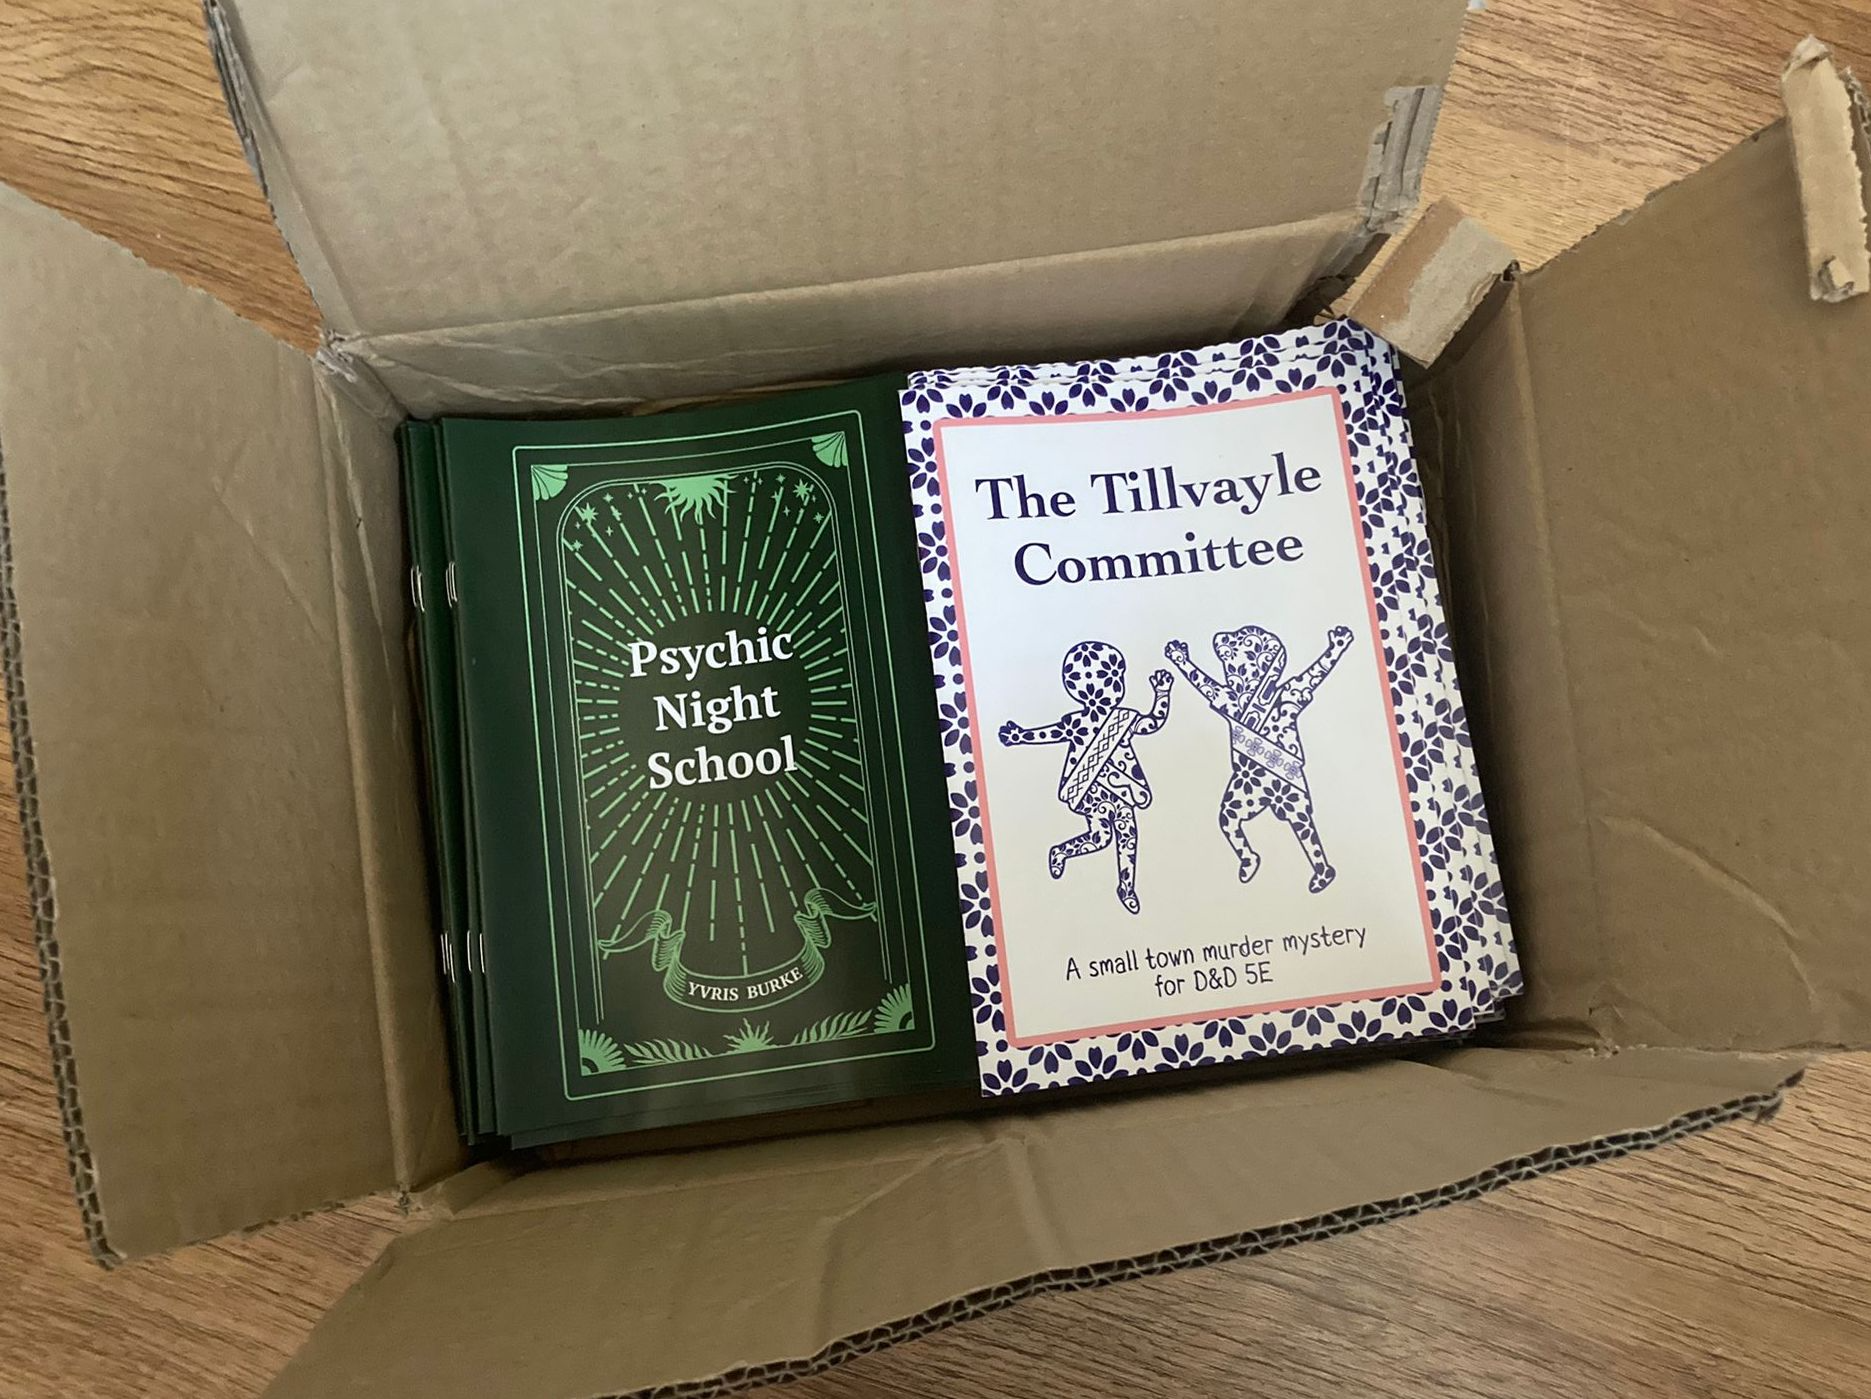 print copies of Psychic Night School and The Tillvayle Committee in a box